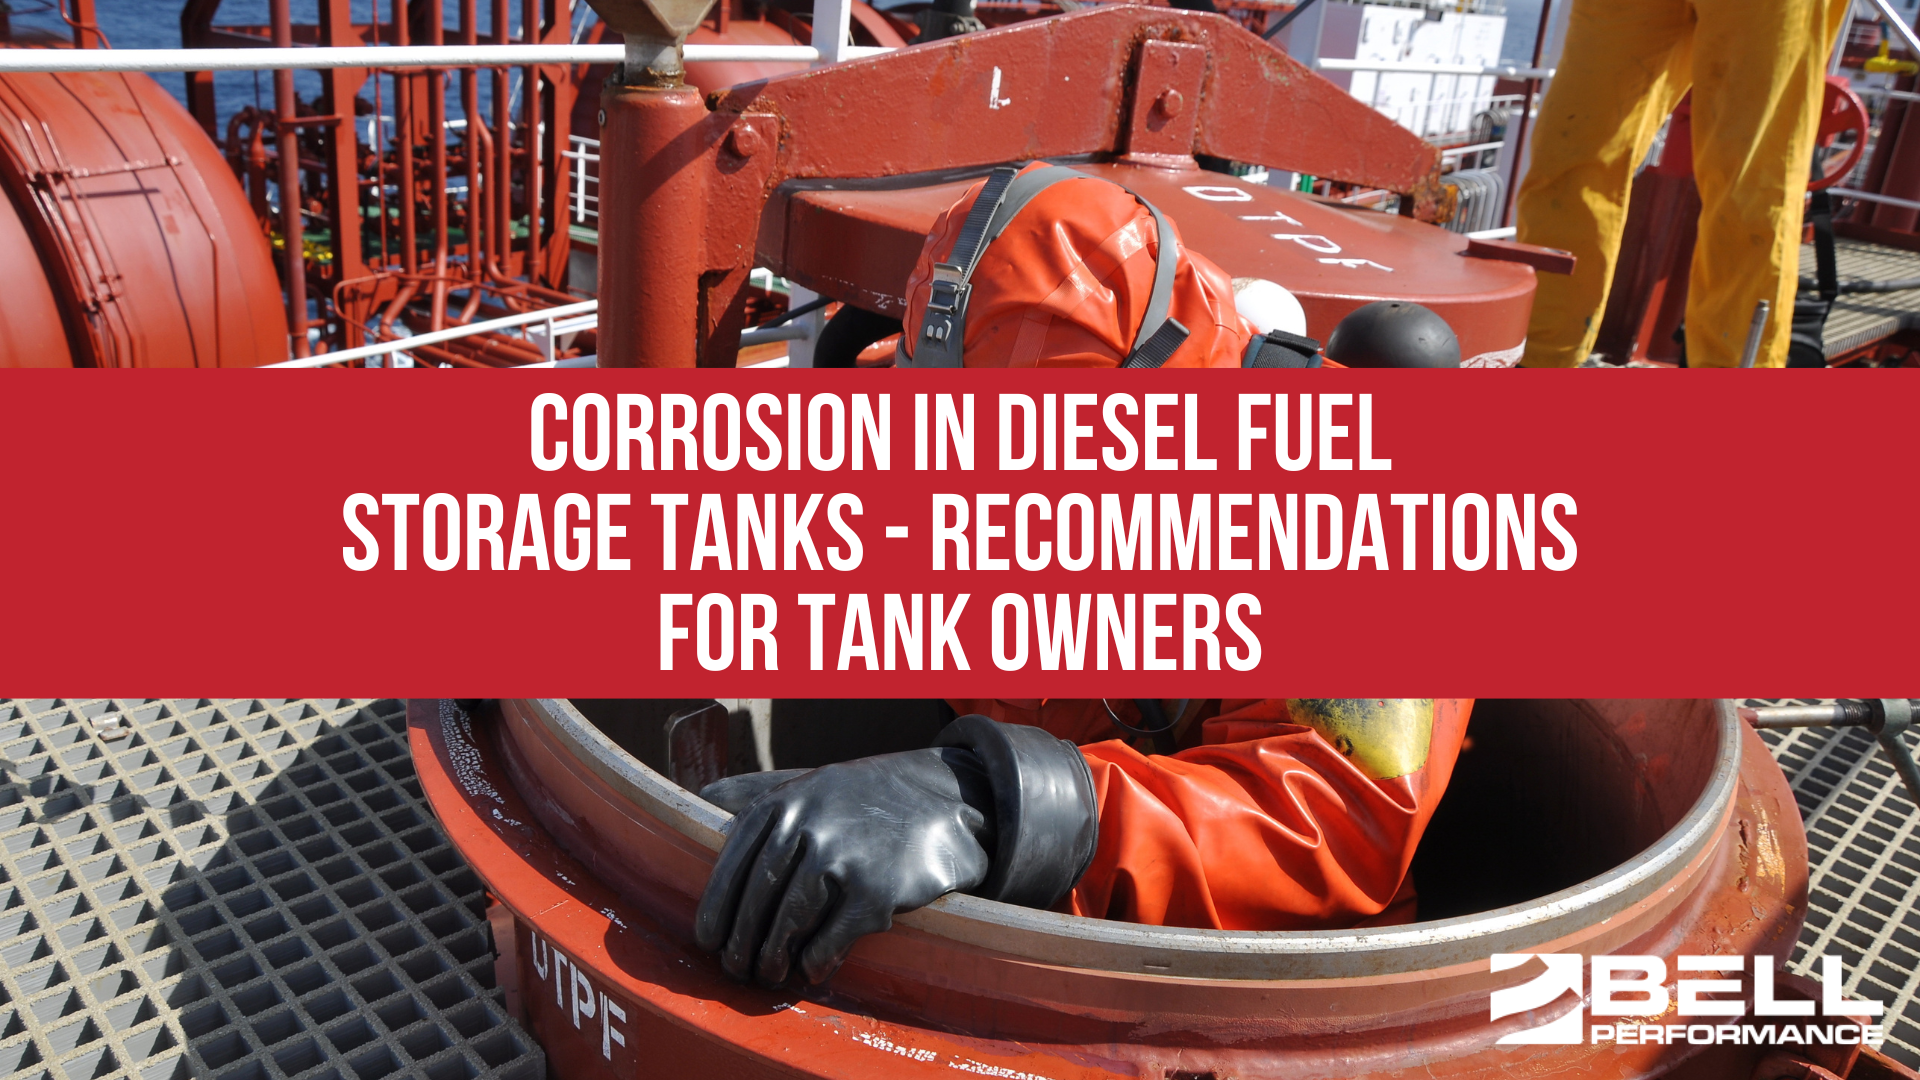 Corrosion in Diesel Fuel Storage Tanks - Recommendations for Tank Owners